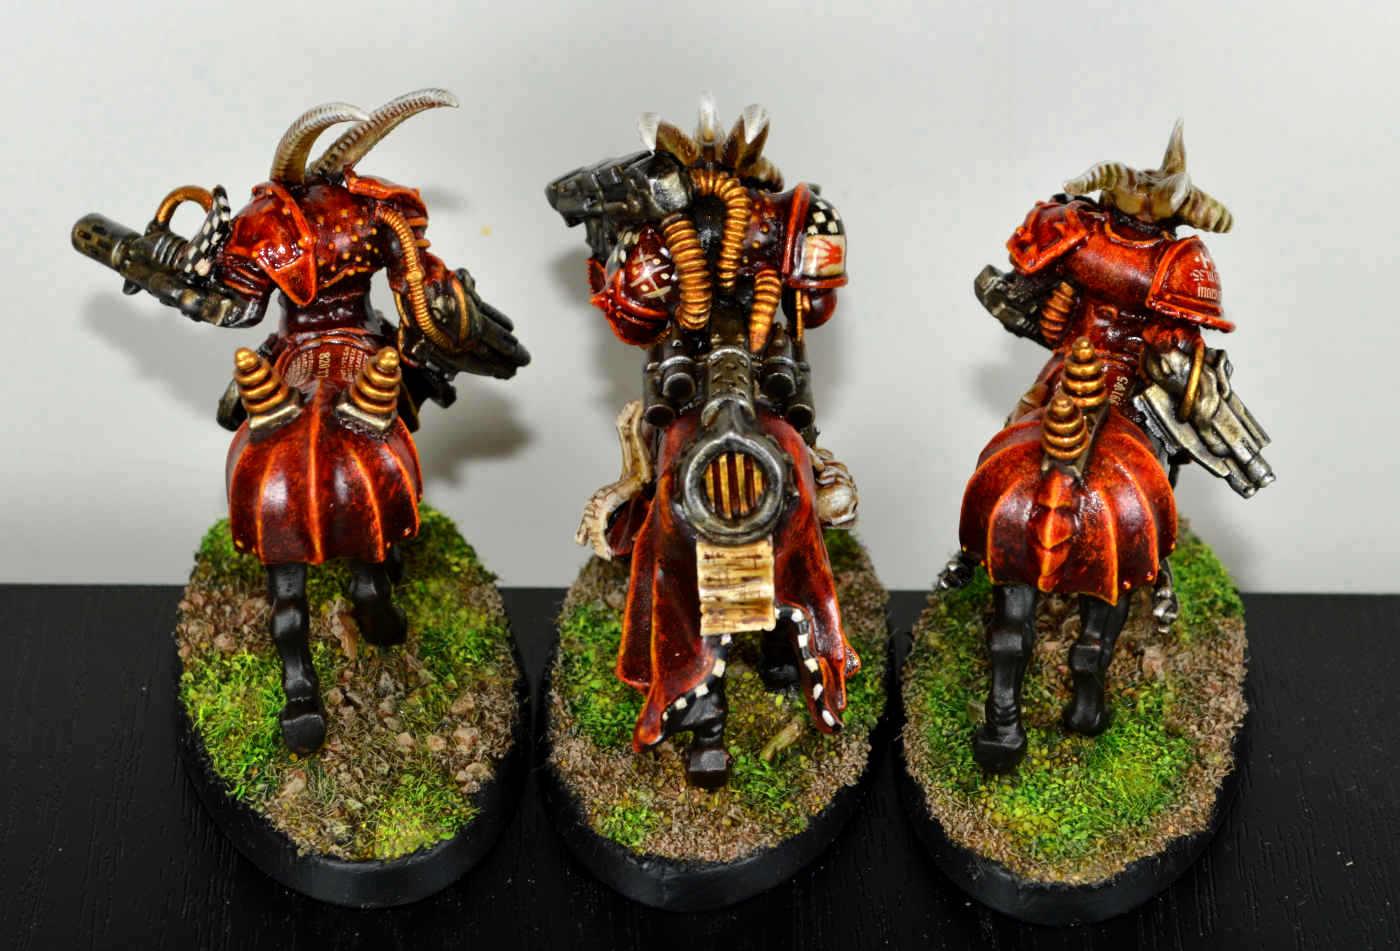 Bike, Centaur, Chaos, Chaos Space Marines, Conversion, Kitbash, Mutant, Overlords, Proxy